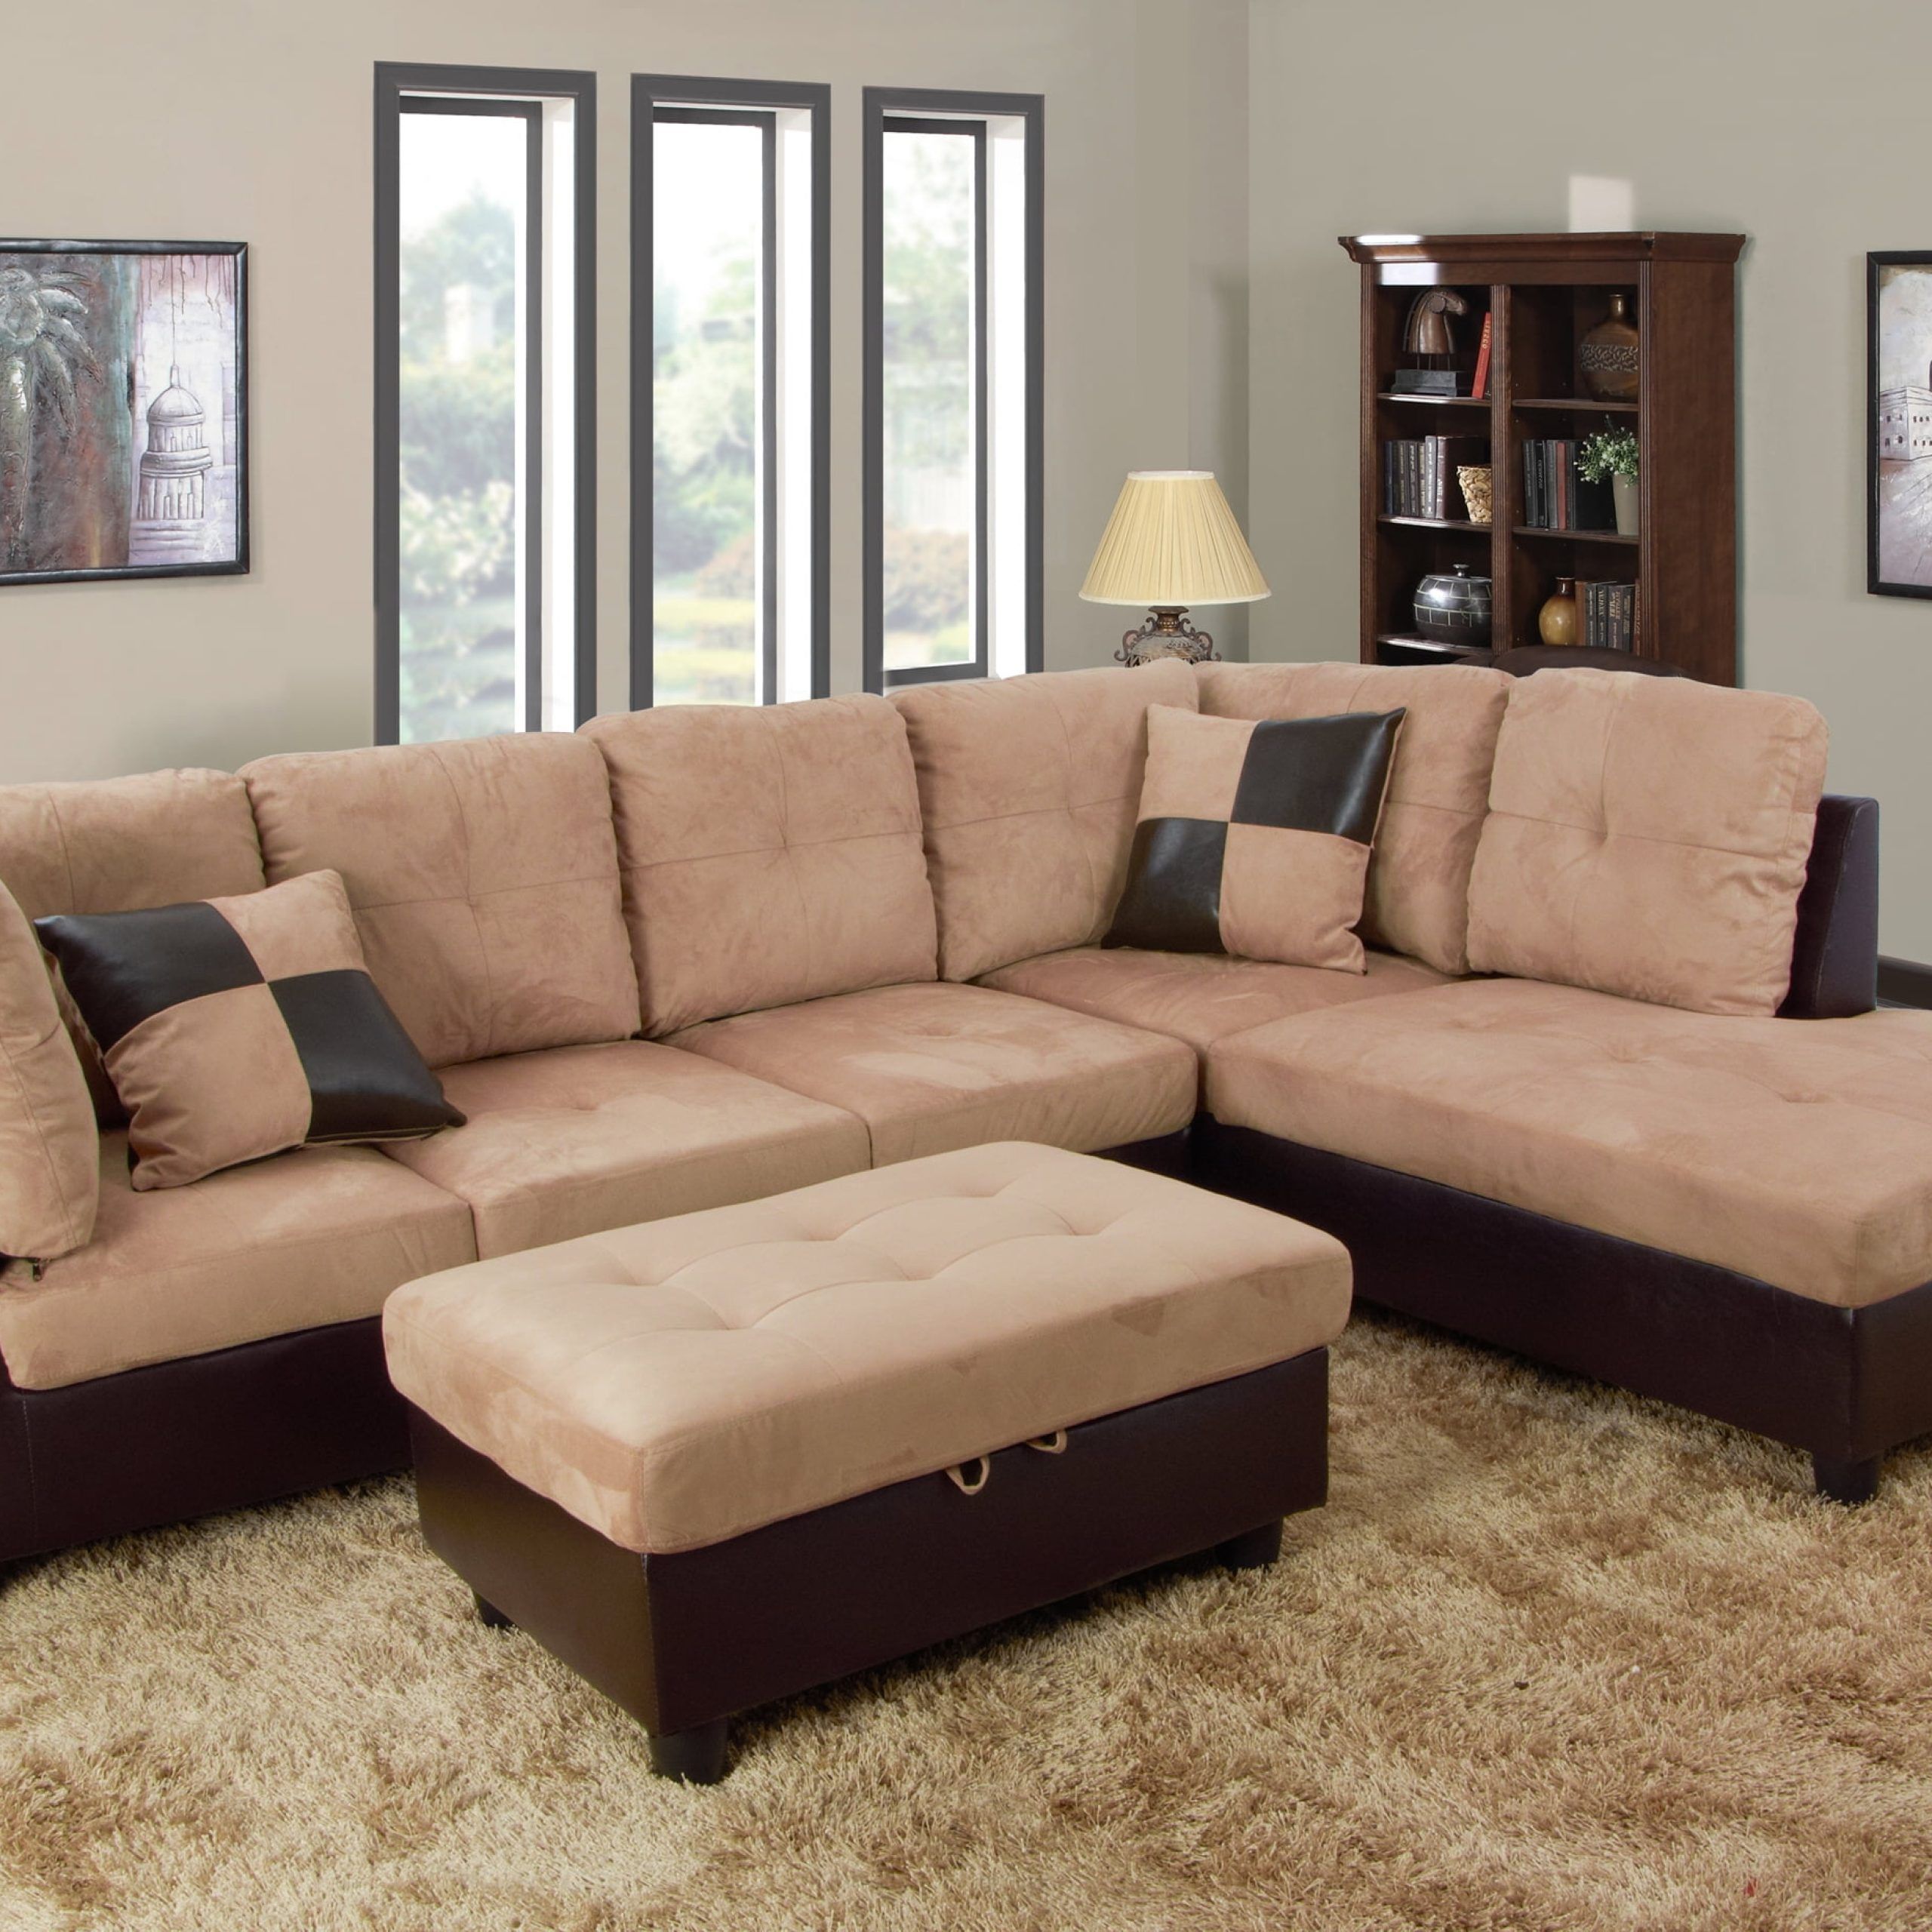 Aycp Furniture 3pcs L Shape Sectional Sofa Set, Left Hand Facing Chaise Pertaining To Small L Shaped Sectional Sofas In Beige (Gallery 15 of 20)